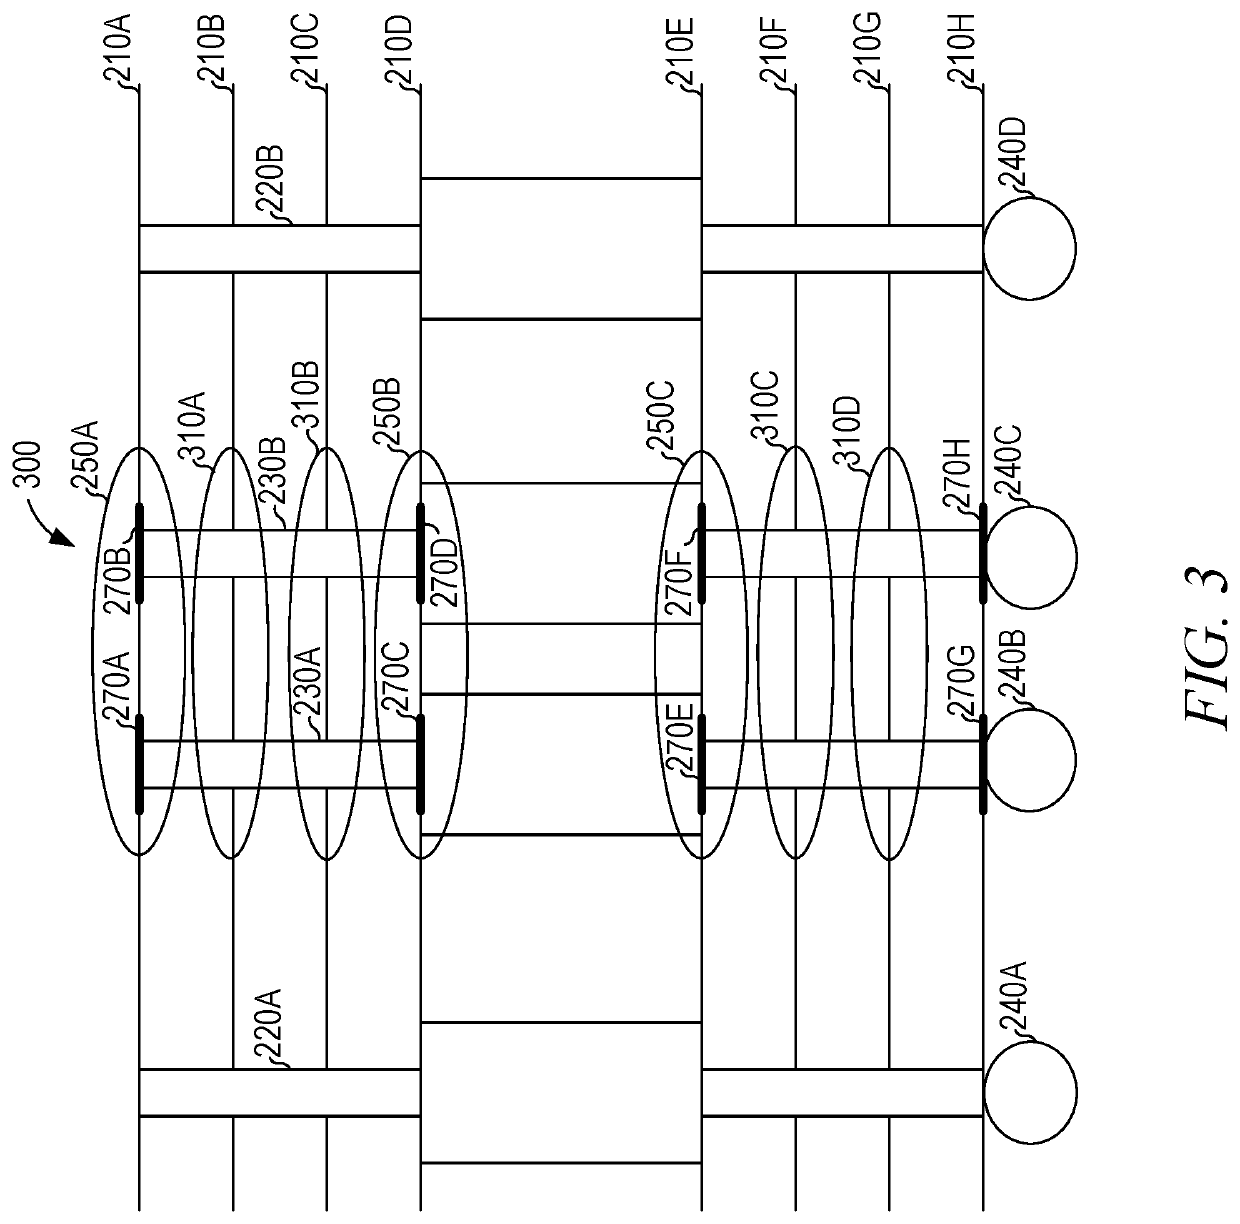 Capacitive compensation for vertical interconnect accesses